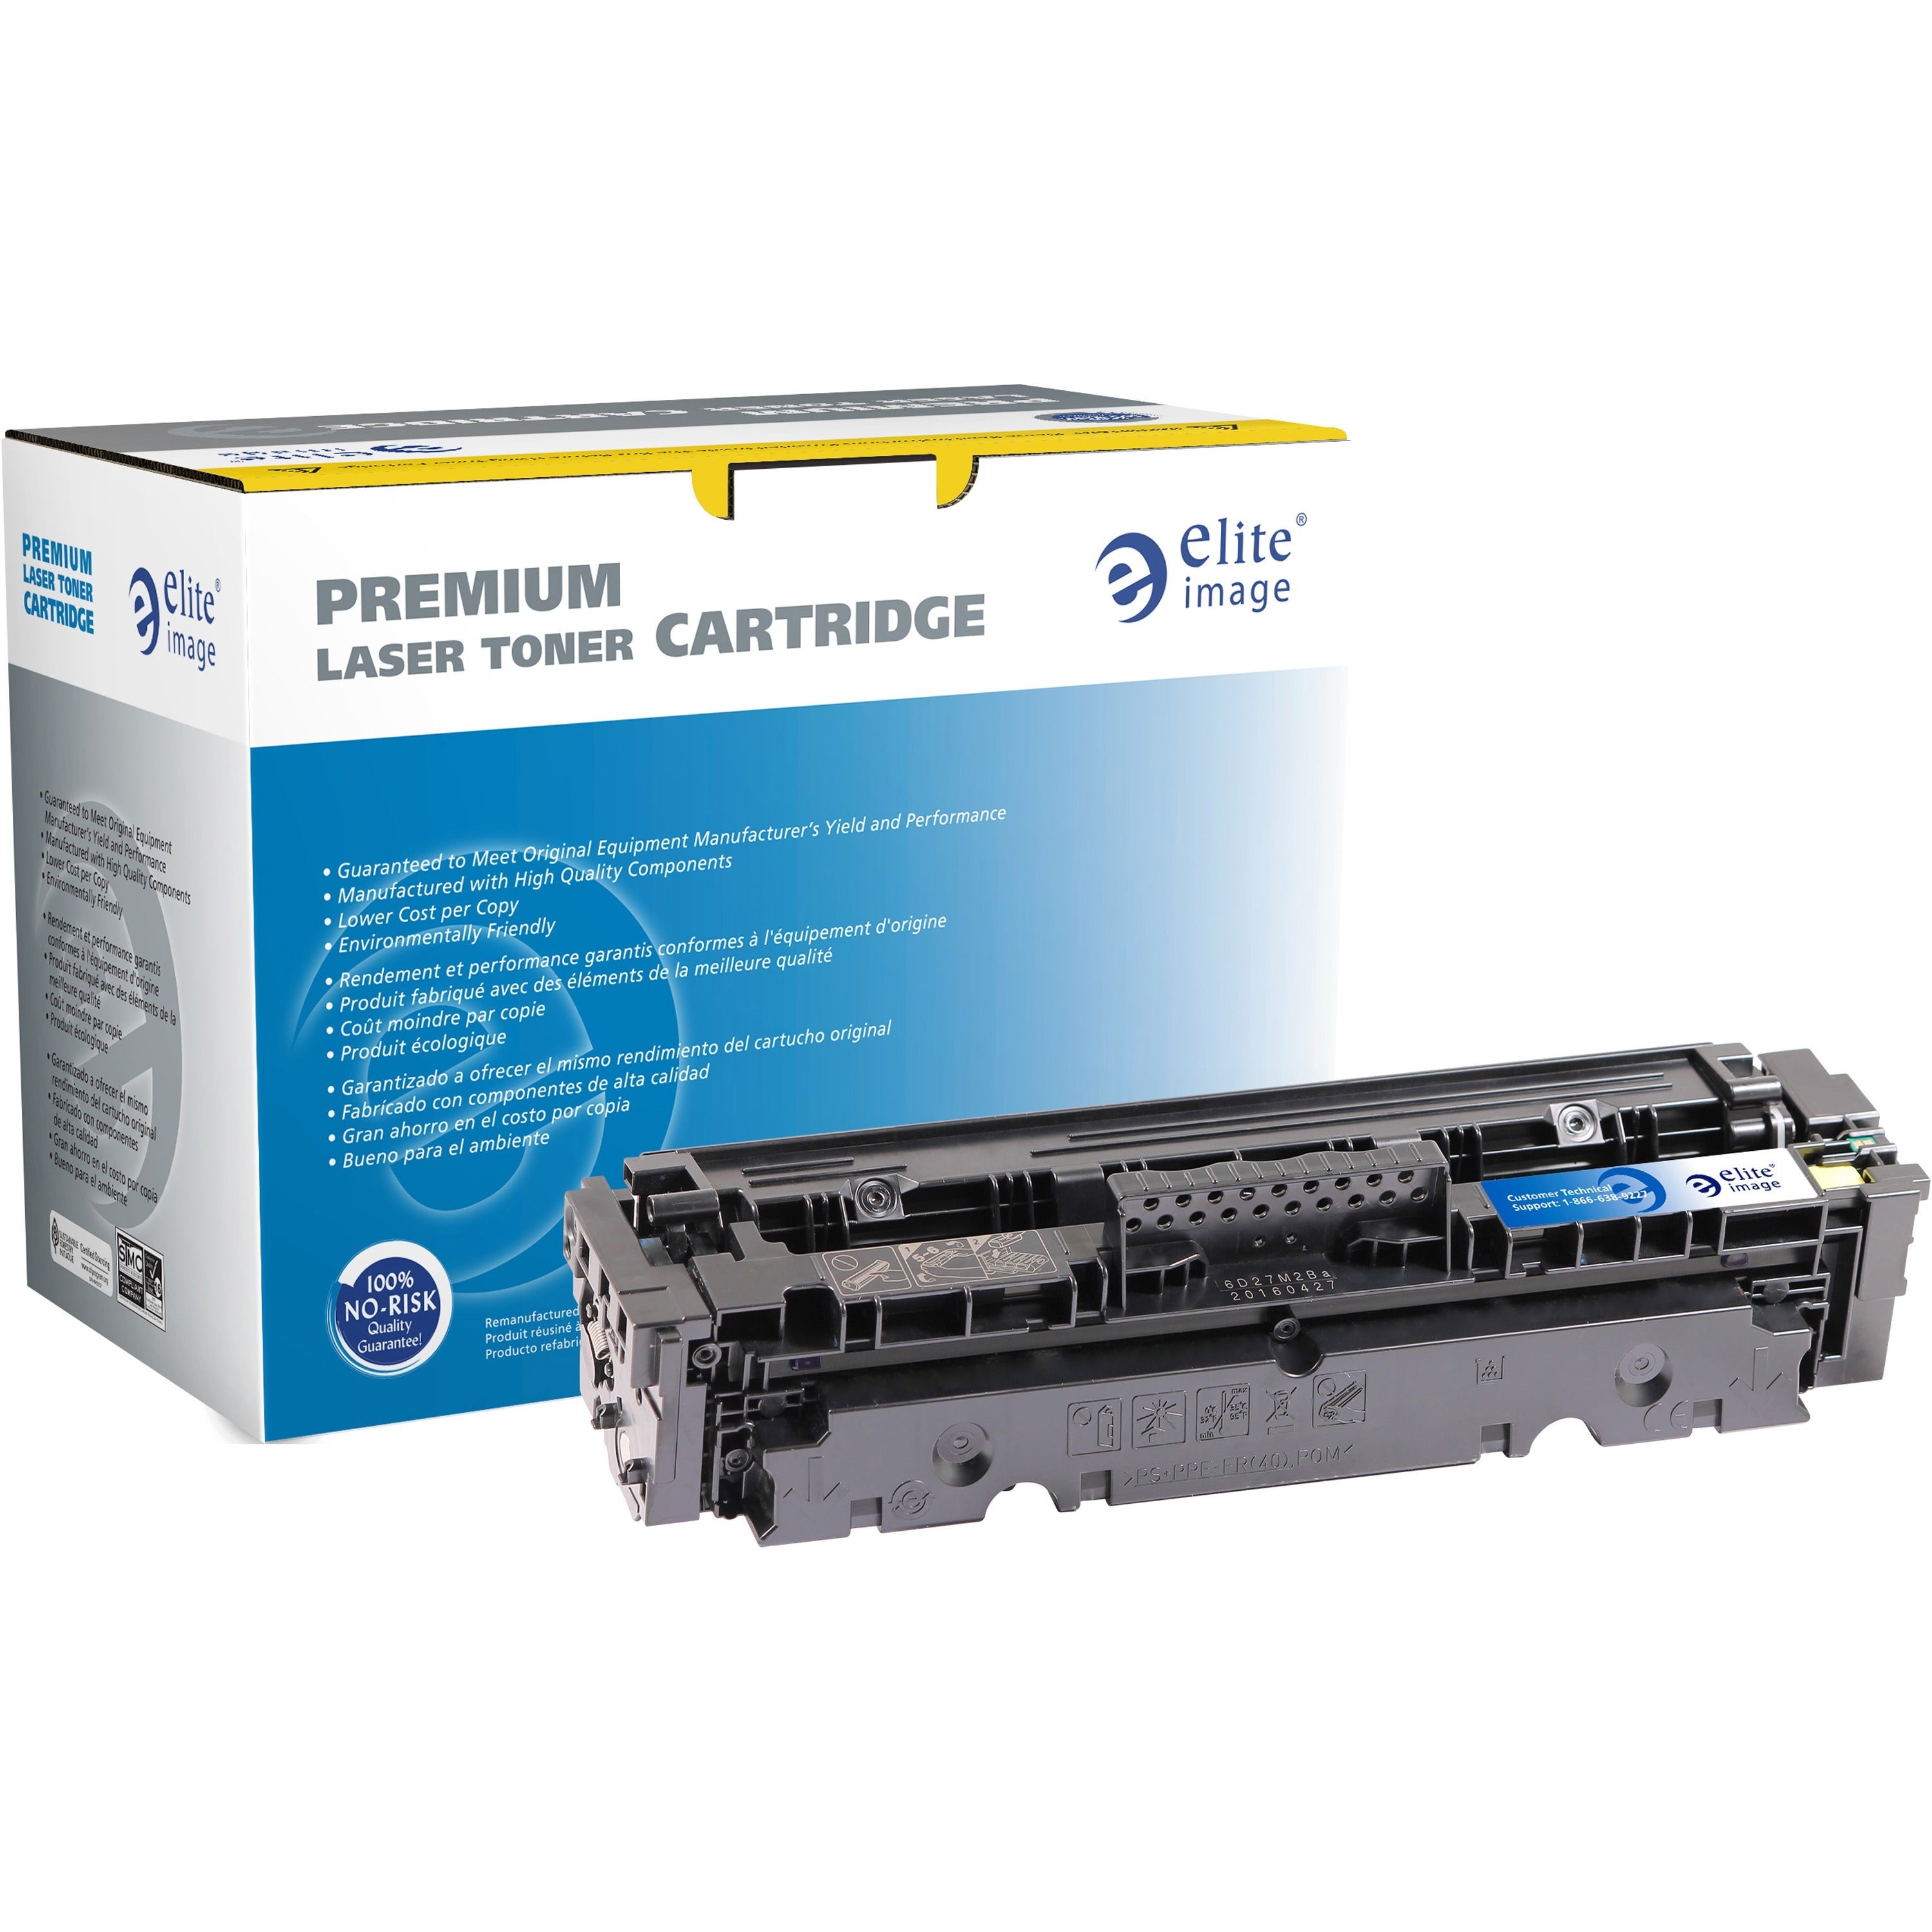 elite-image-remanufactured-high-yield-laser-toner-cartridge-alternative-for-hp-410x-yellow-1-each-5000-pages_eli02809 - 1